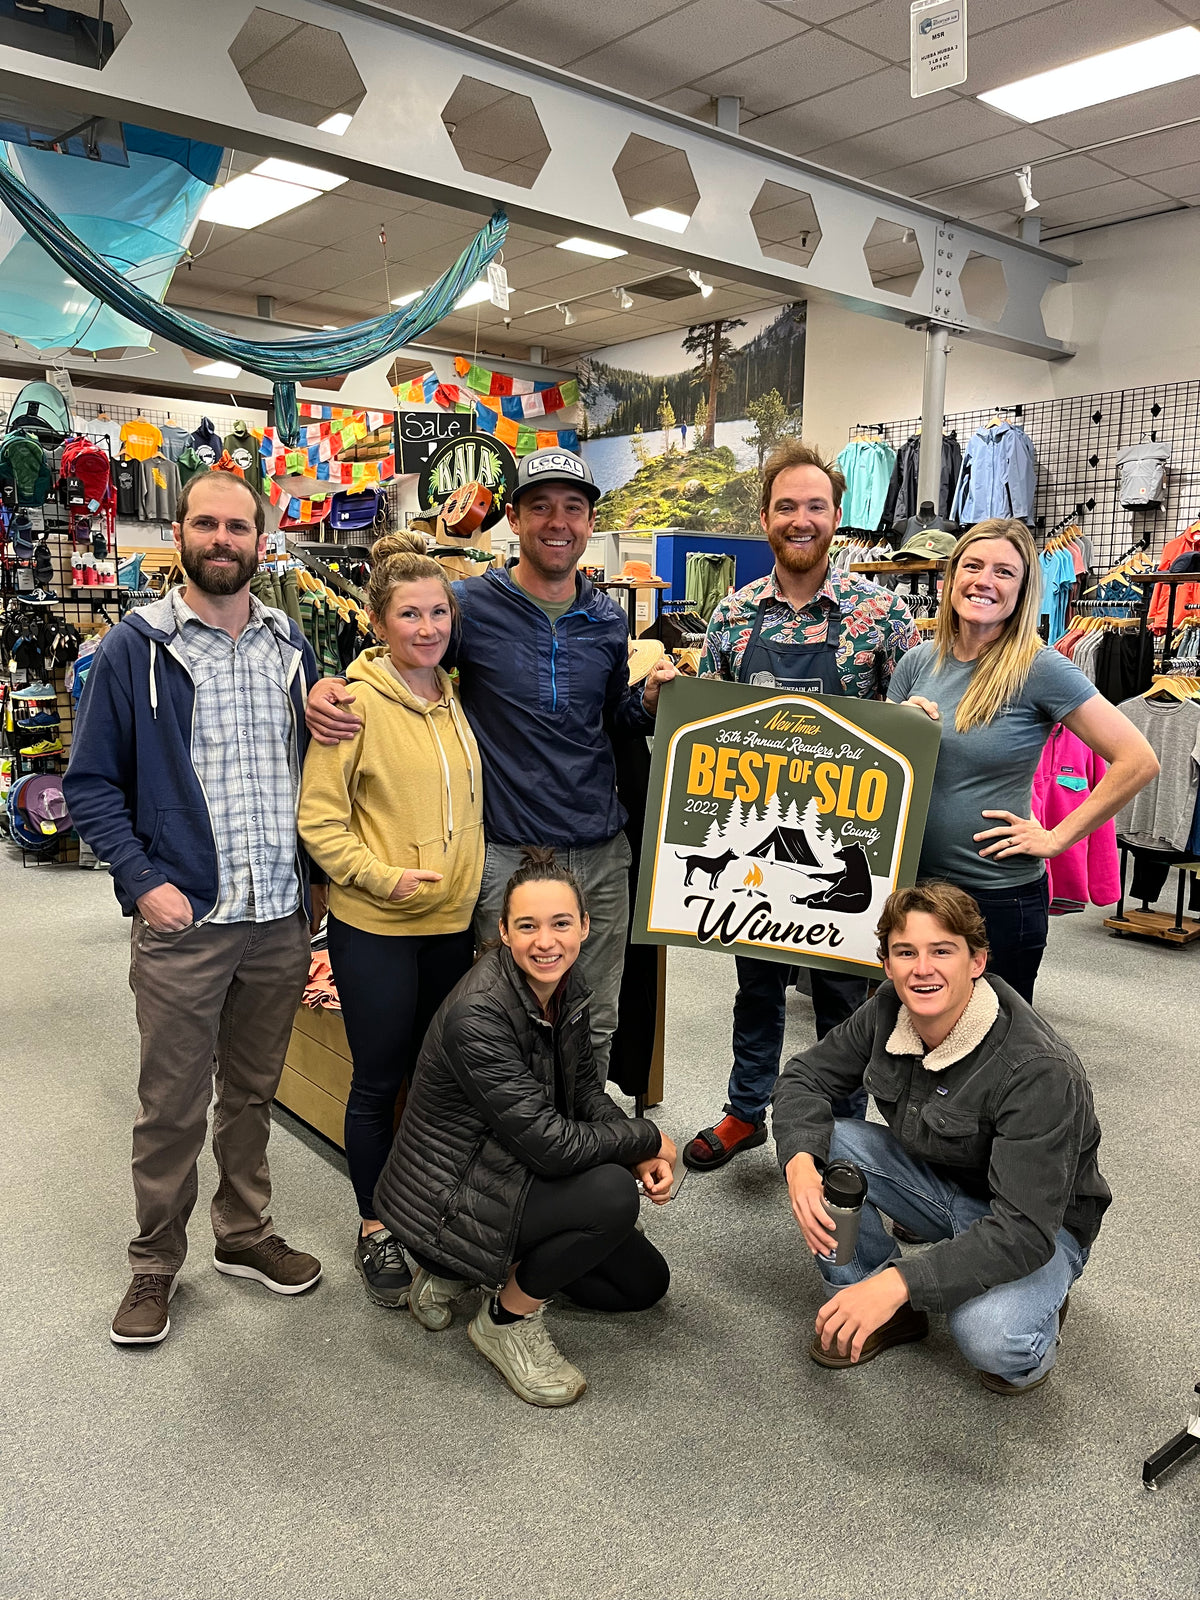 Voted best outdoor store in San Luis Obispo county for seventh straight year